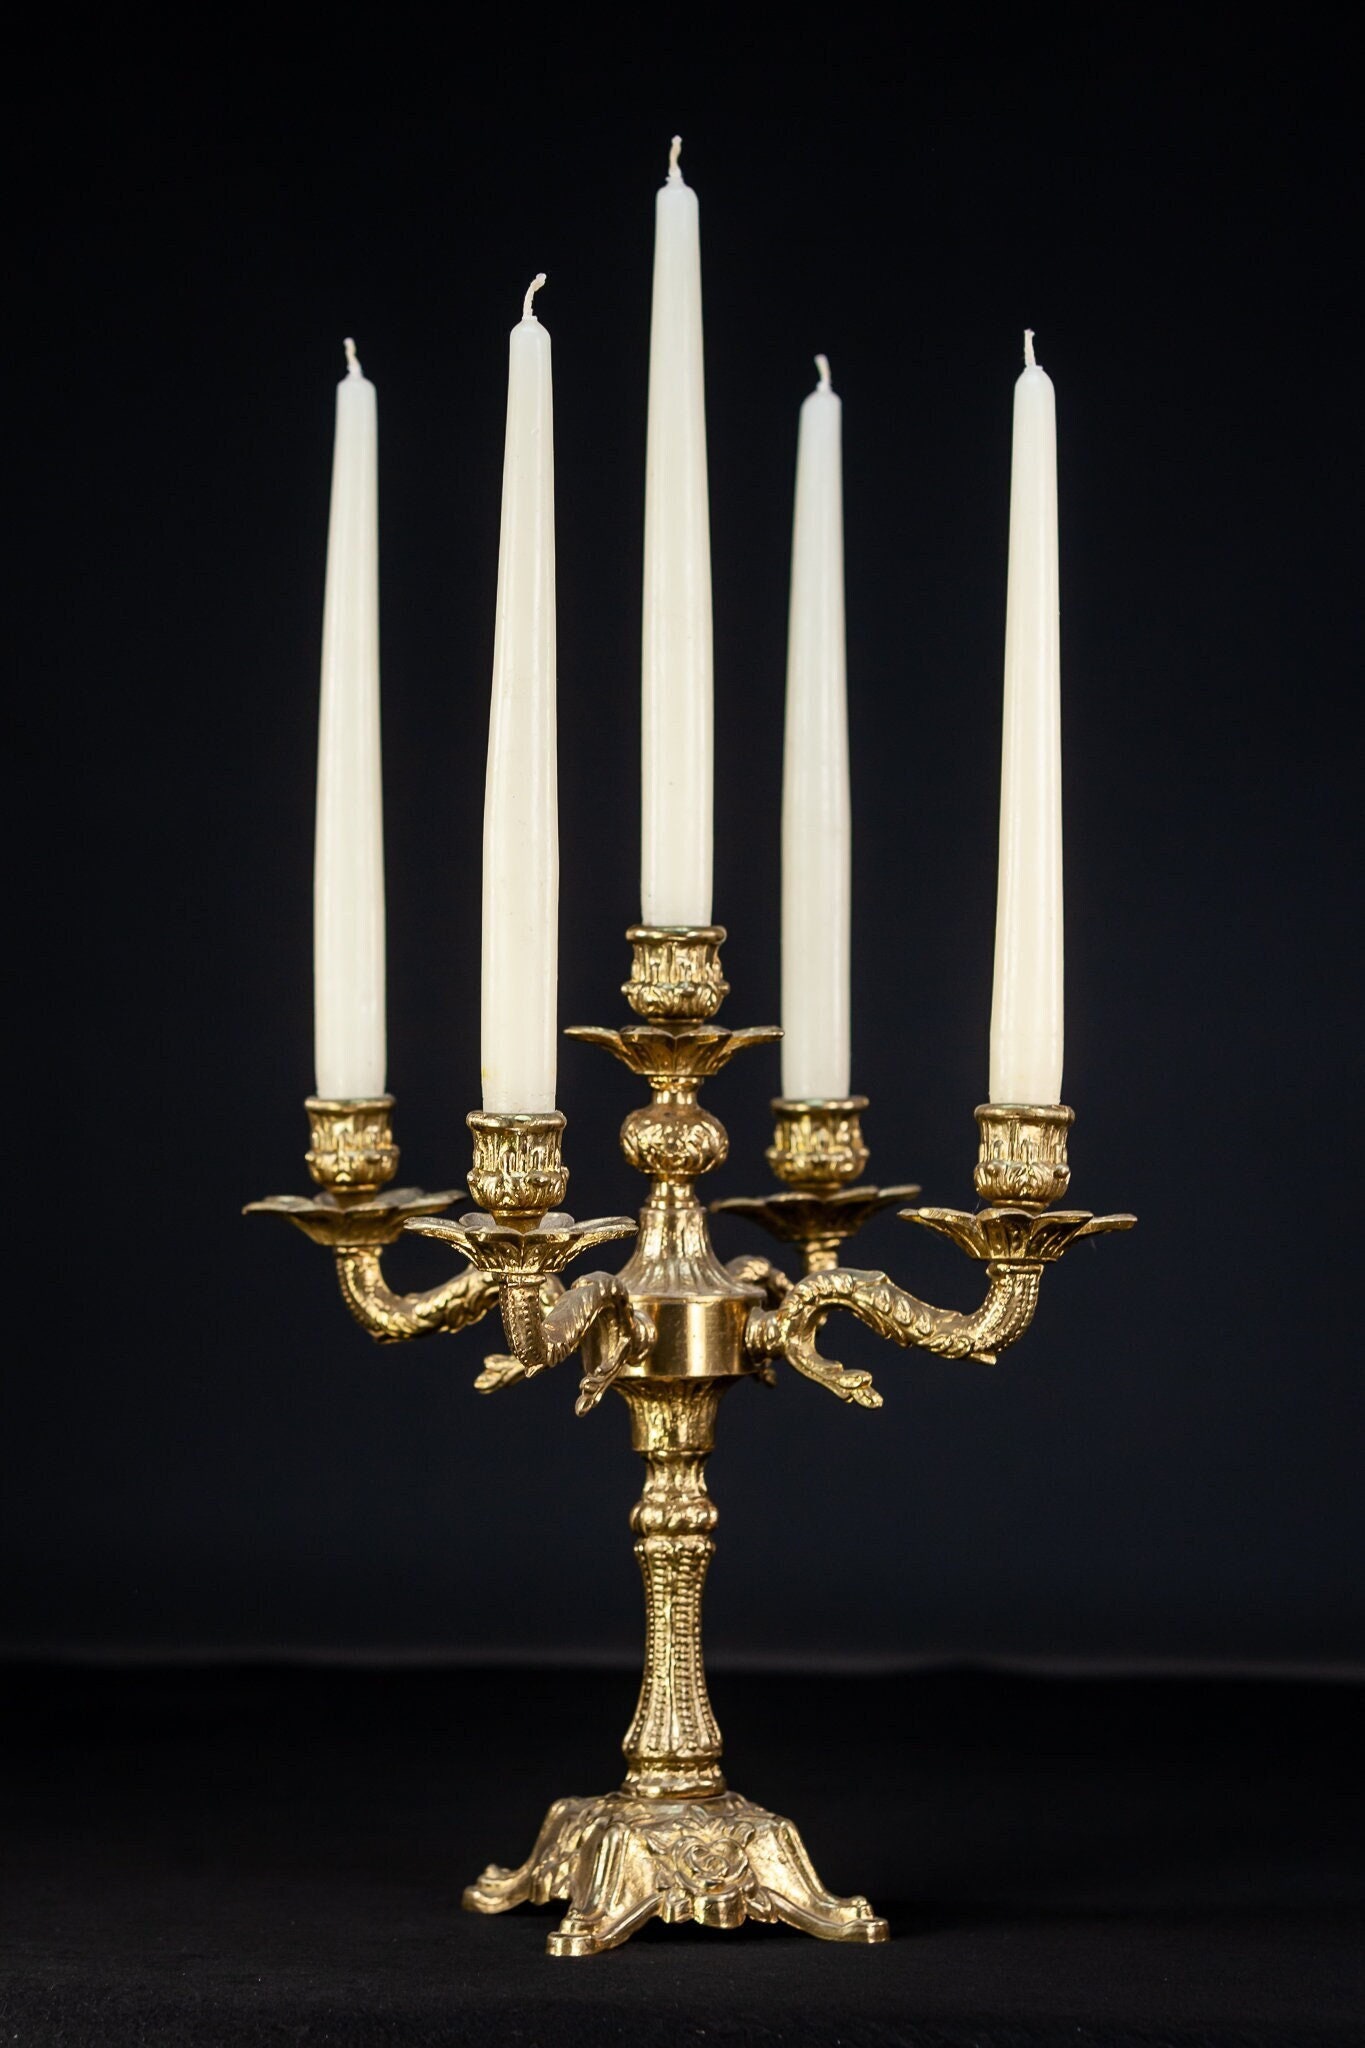 Vintage Baroque Style Brass Brevetto Candelabra That Holds 5 Total Candles  16.5